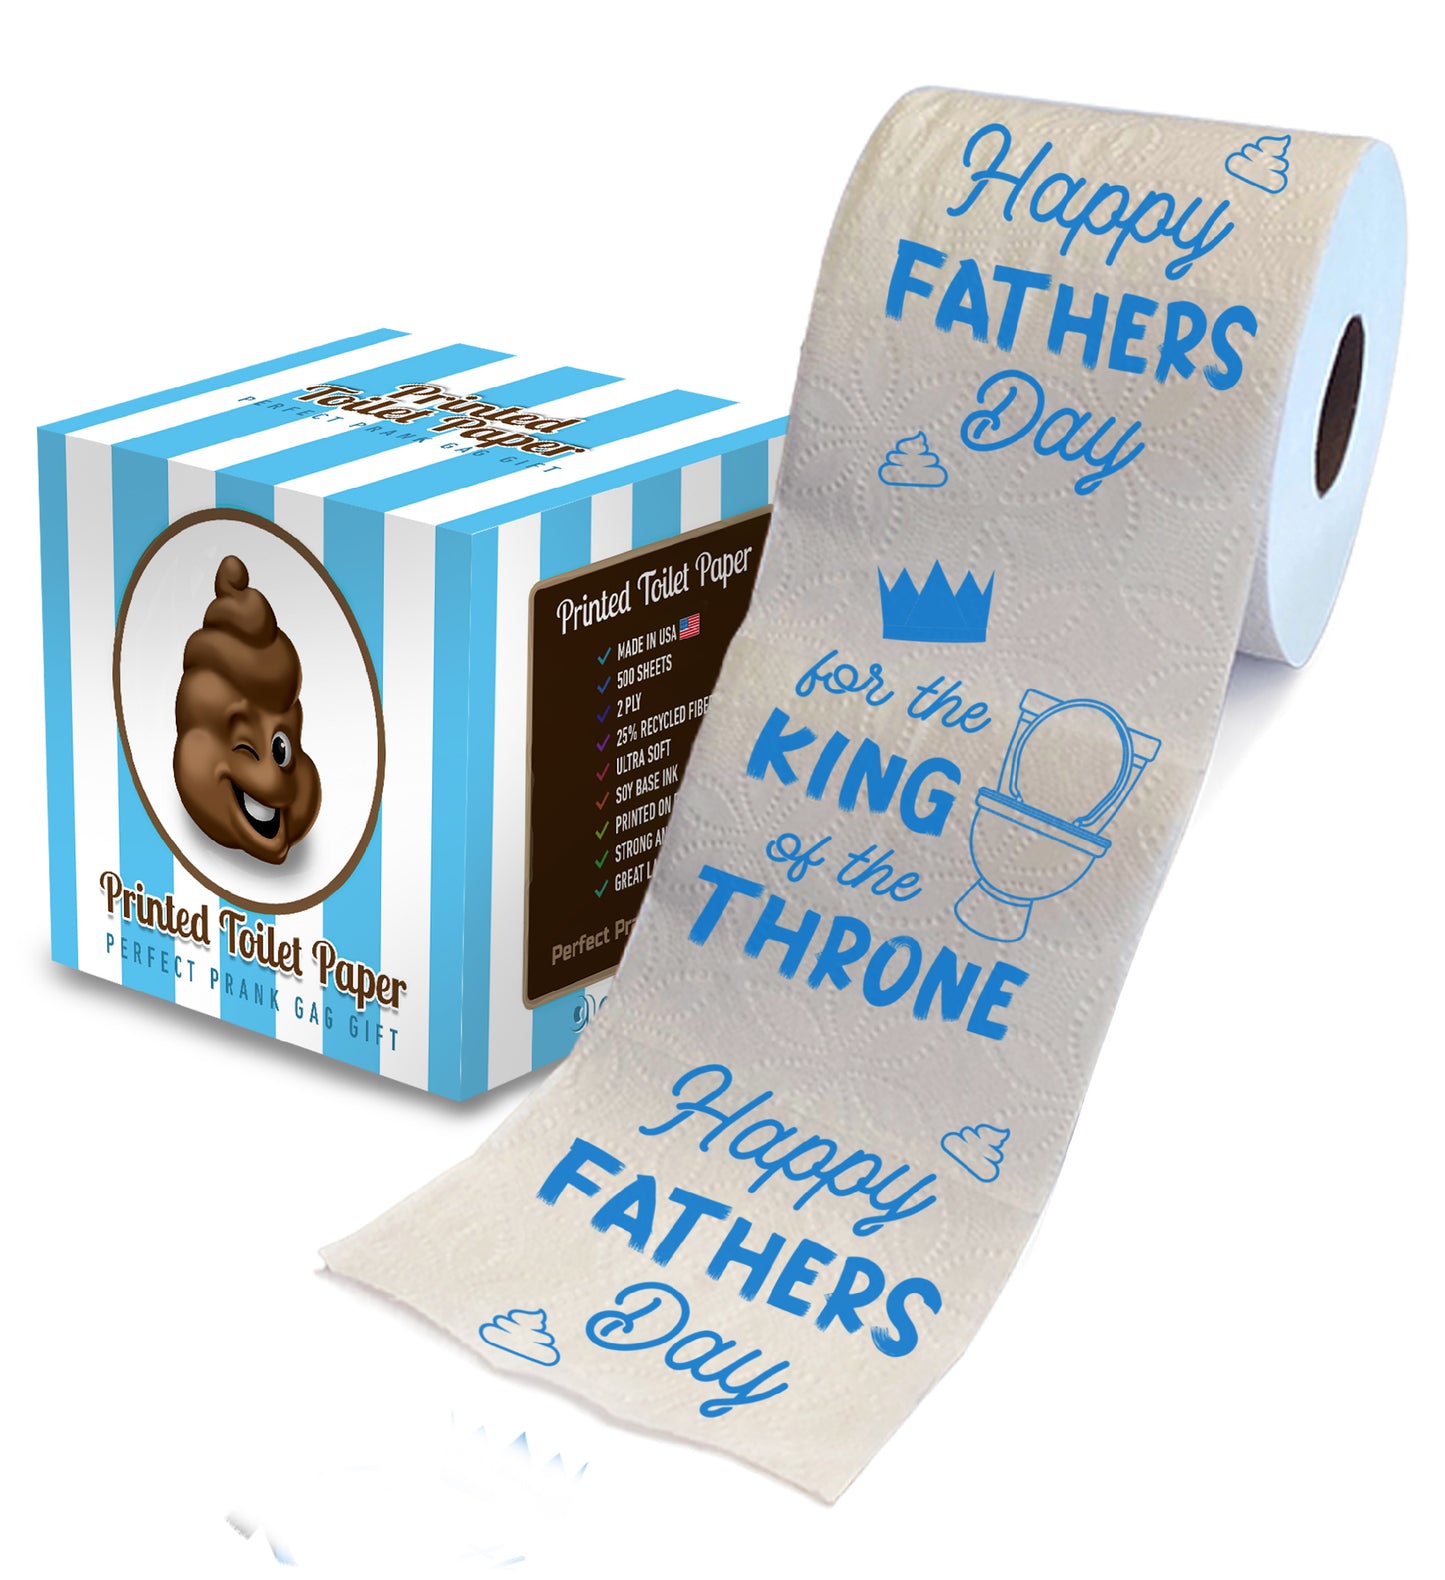 Printed TP Happy Fathers Day For the King of the Throne Toilet Paper, 500 Sheet